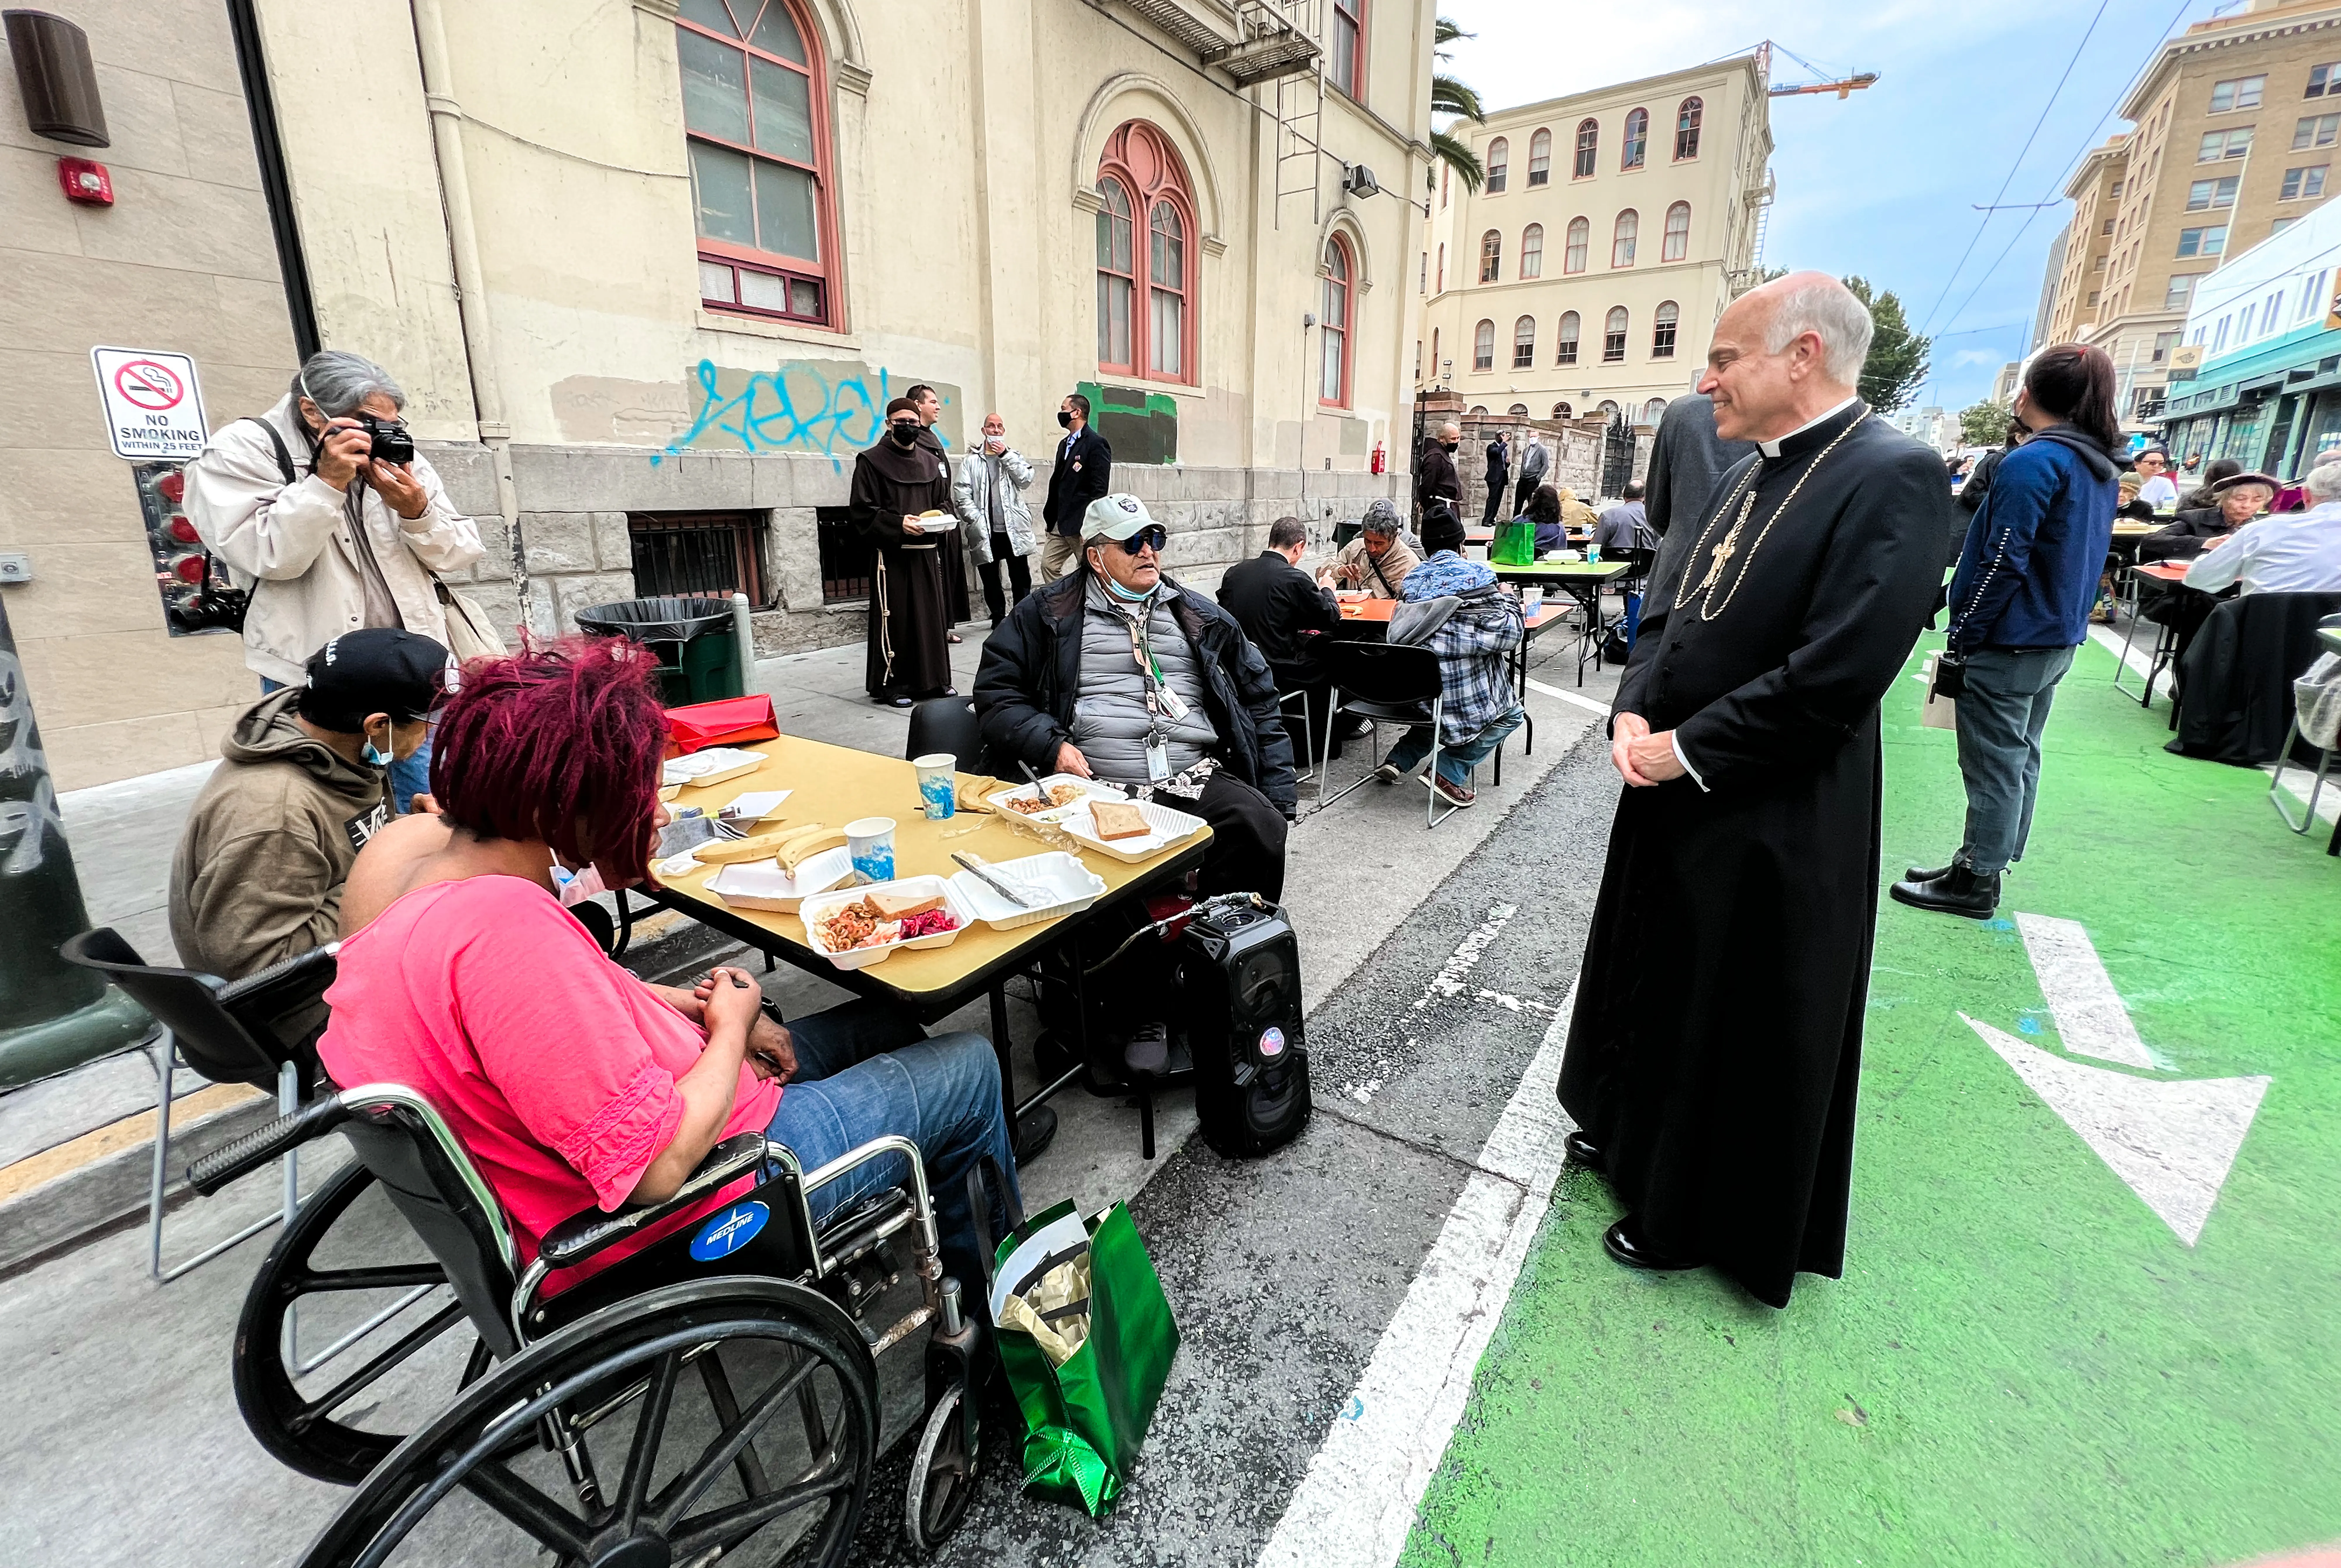 Archbishop Salvatore Cordileone meets with people experiencing homelessness at St. Anthony’s Dining Hall in San Francisco's Tenderloin neighborhood on Nov. 6, 2021.?w=200&h=150